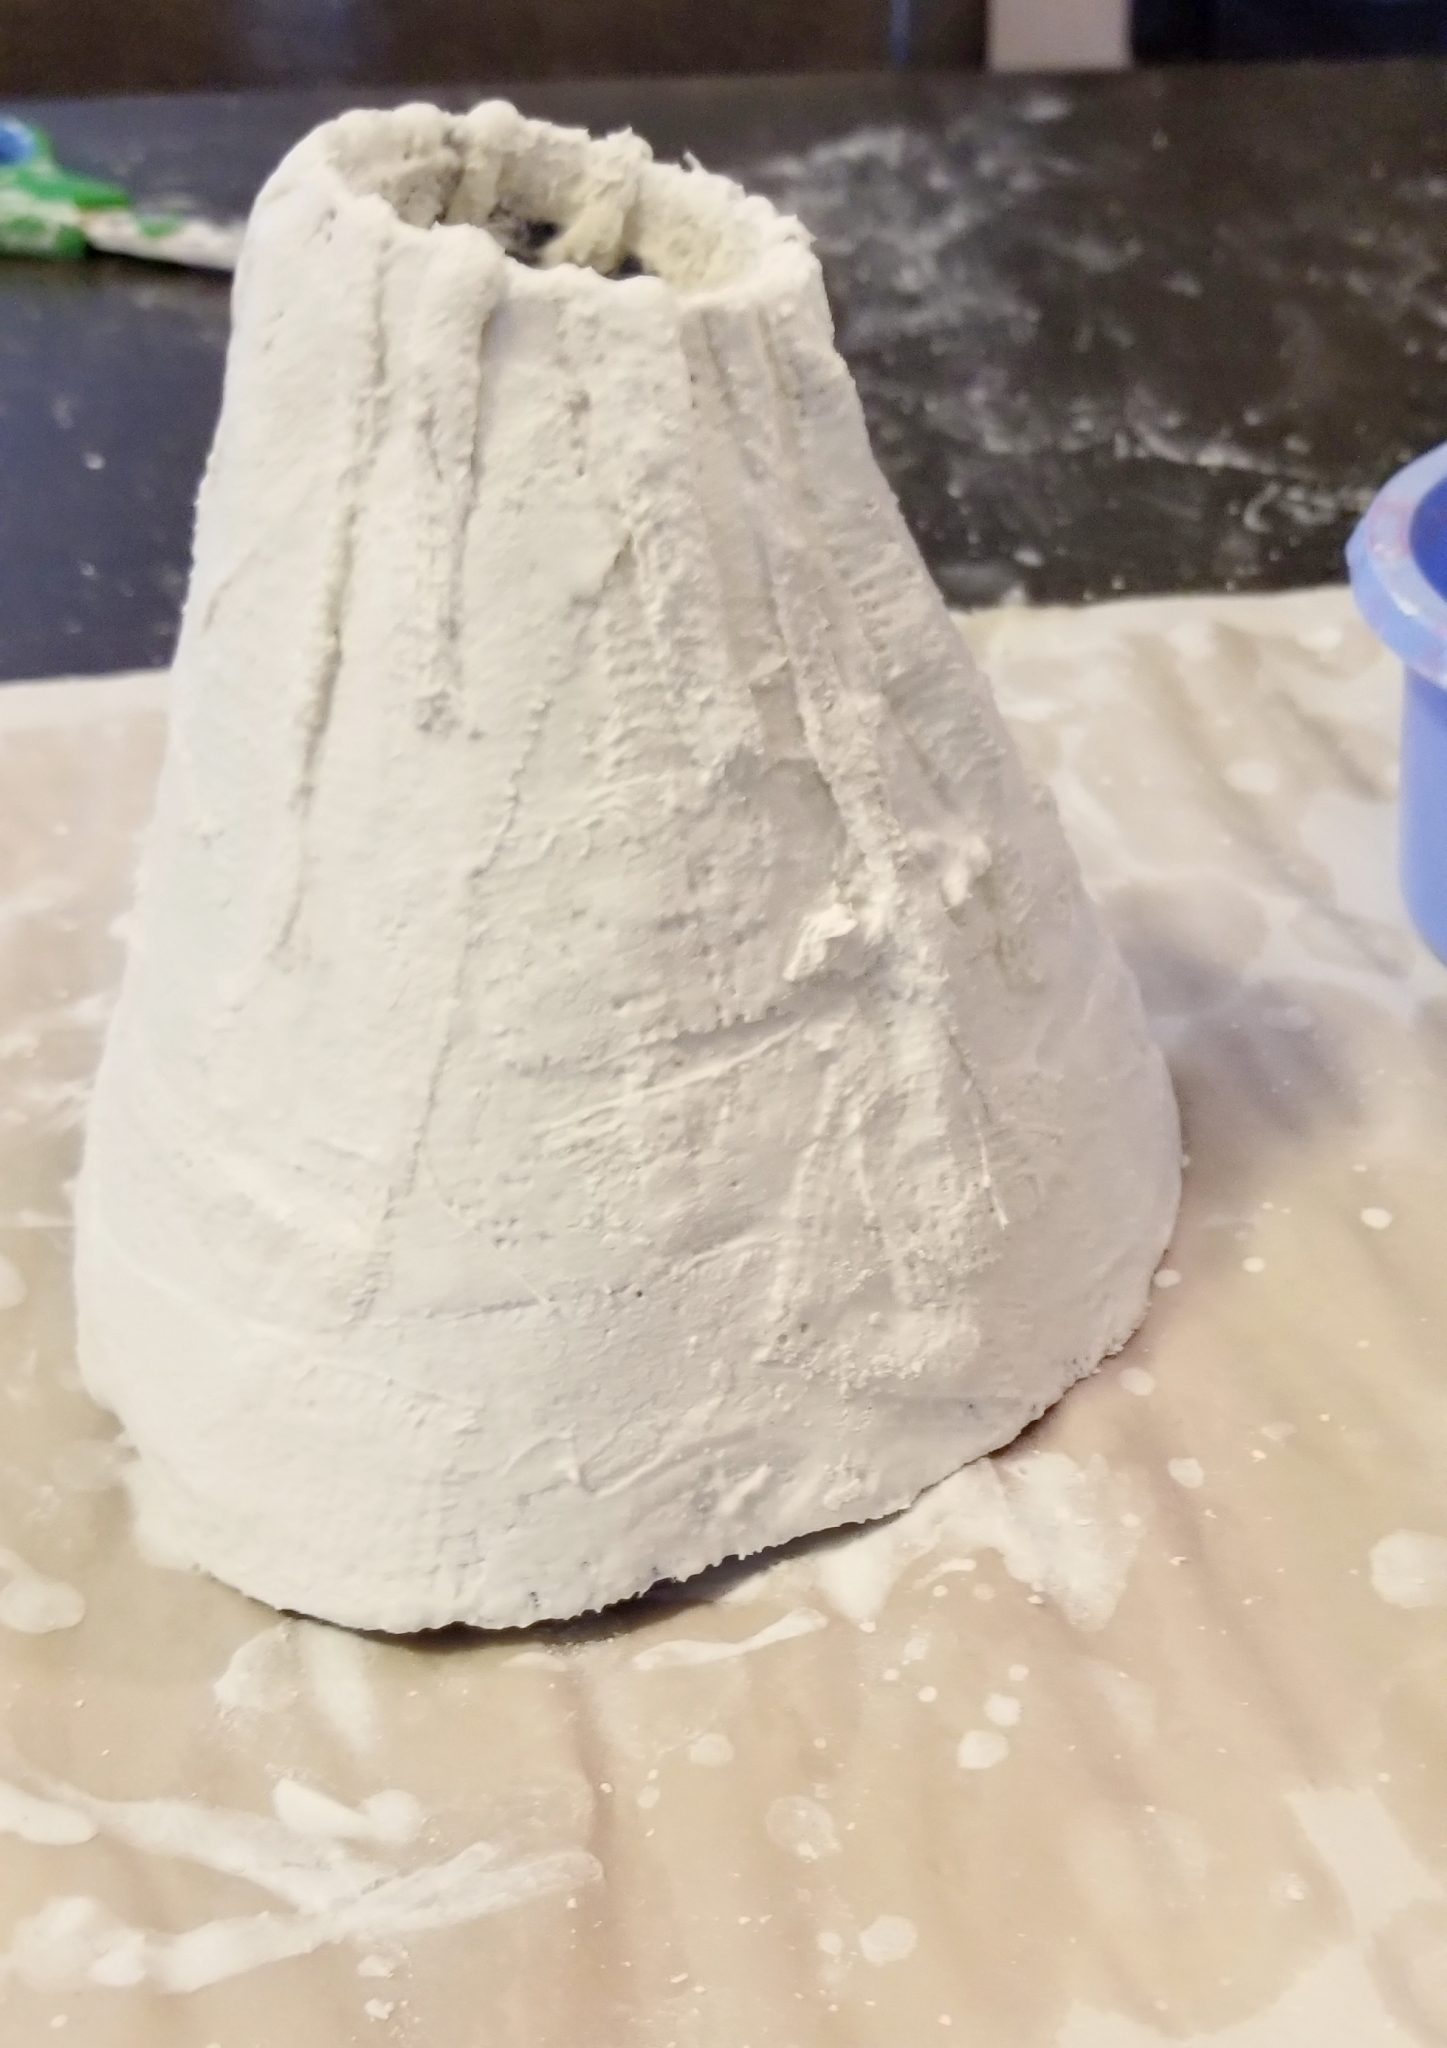 youtube applying plaster cloth to your volcano